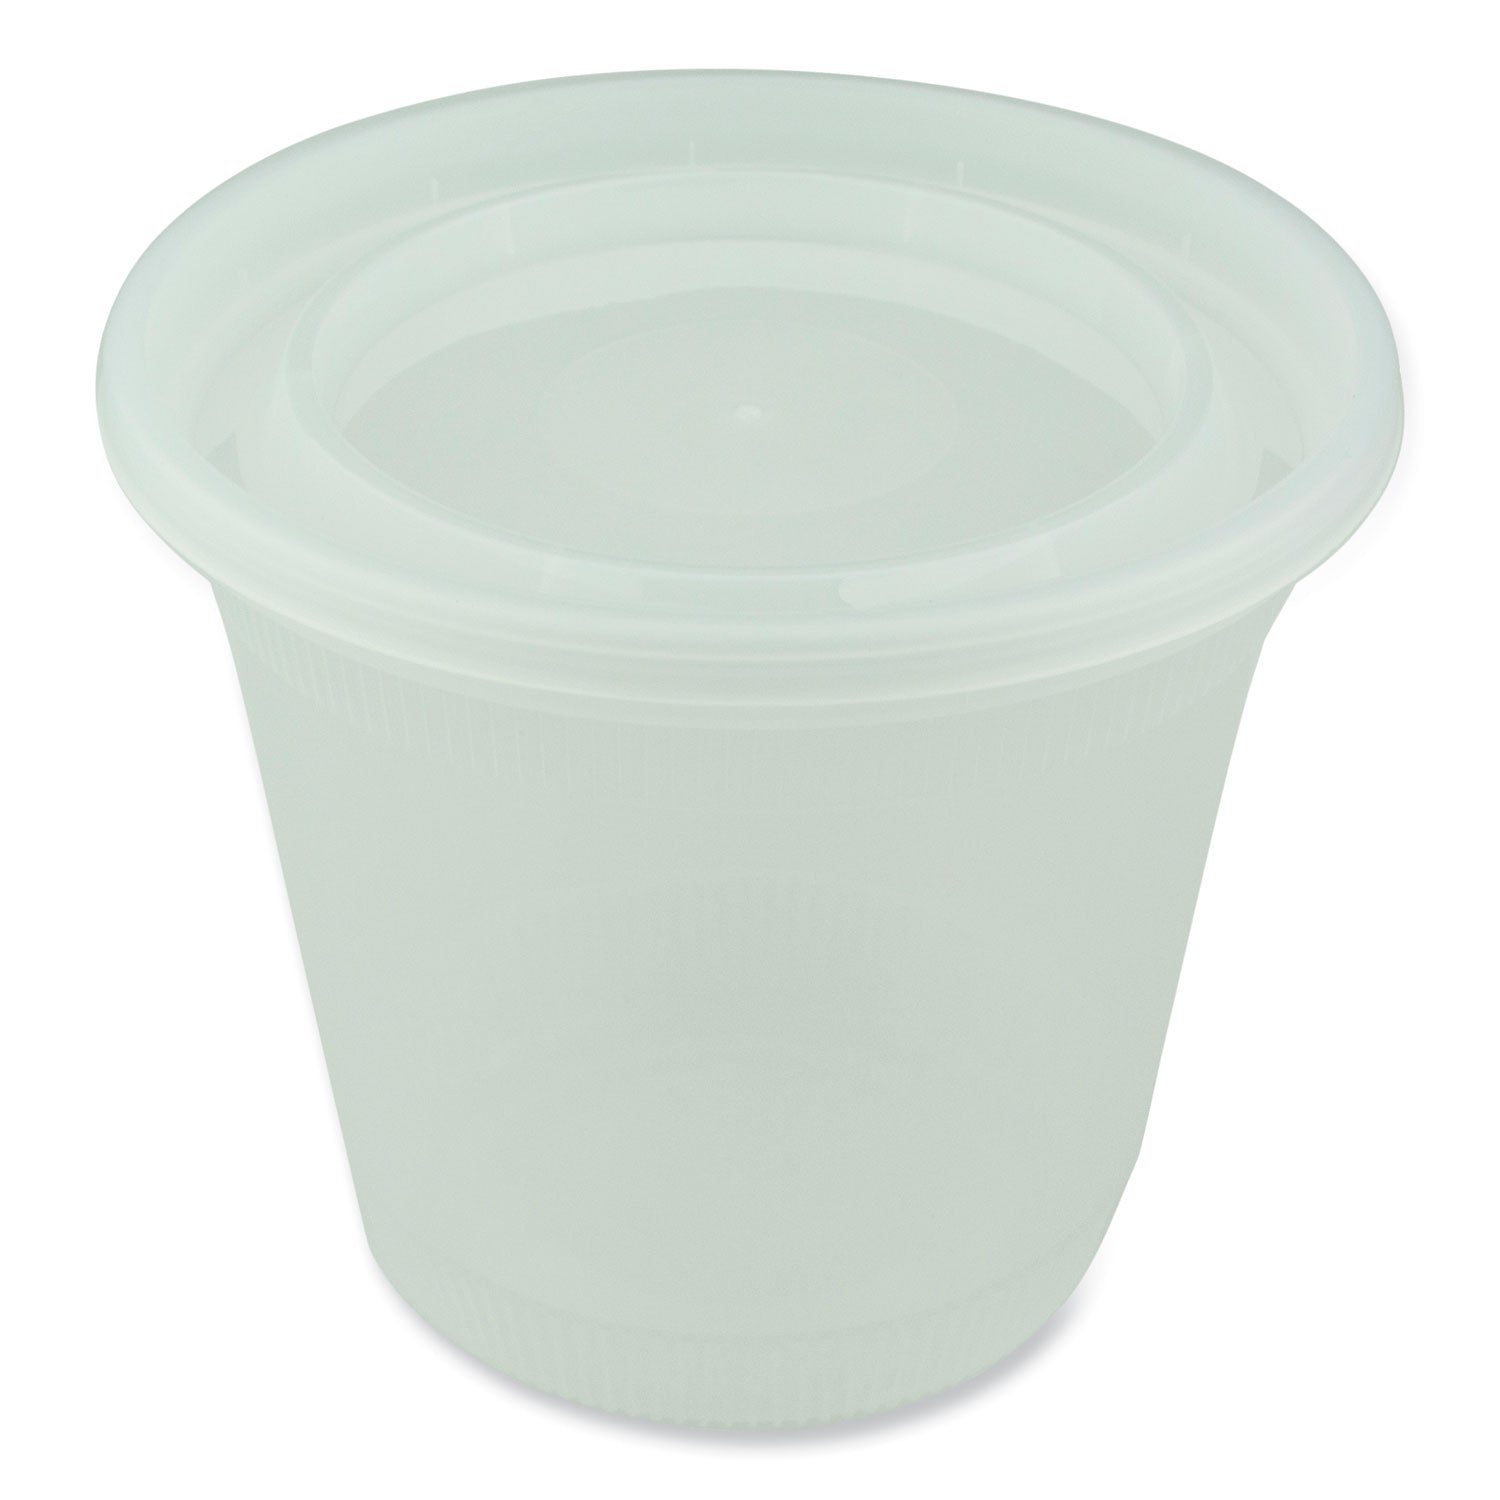 newspring-delitainer-microwavable-container-32-oz-55-x-55-x-49-clear-plastic-200-carton_pctl8328 - 1